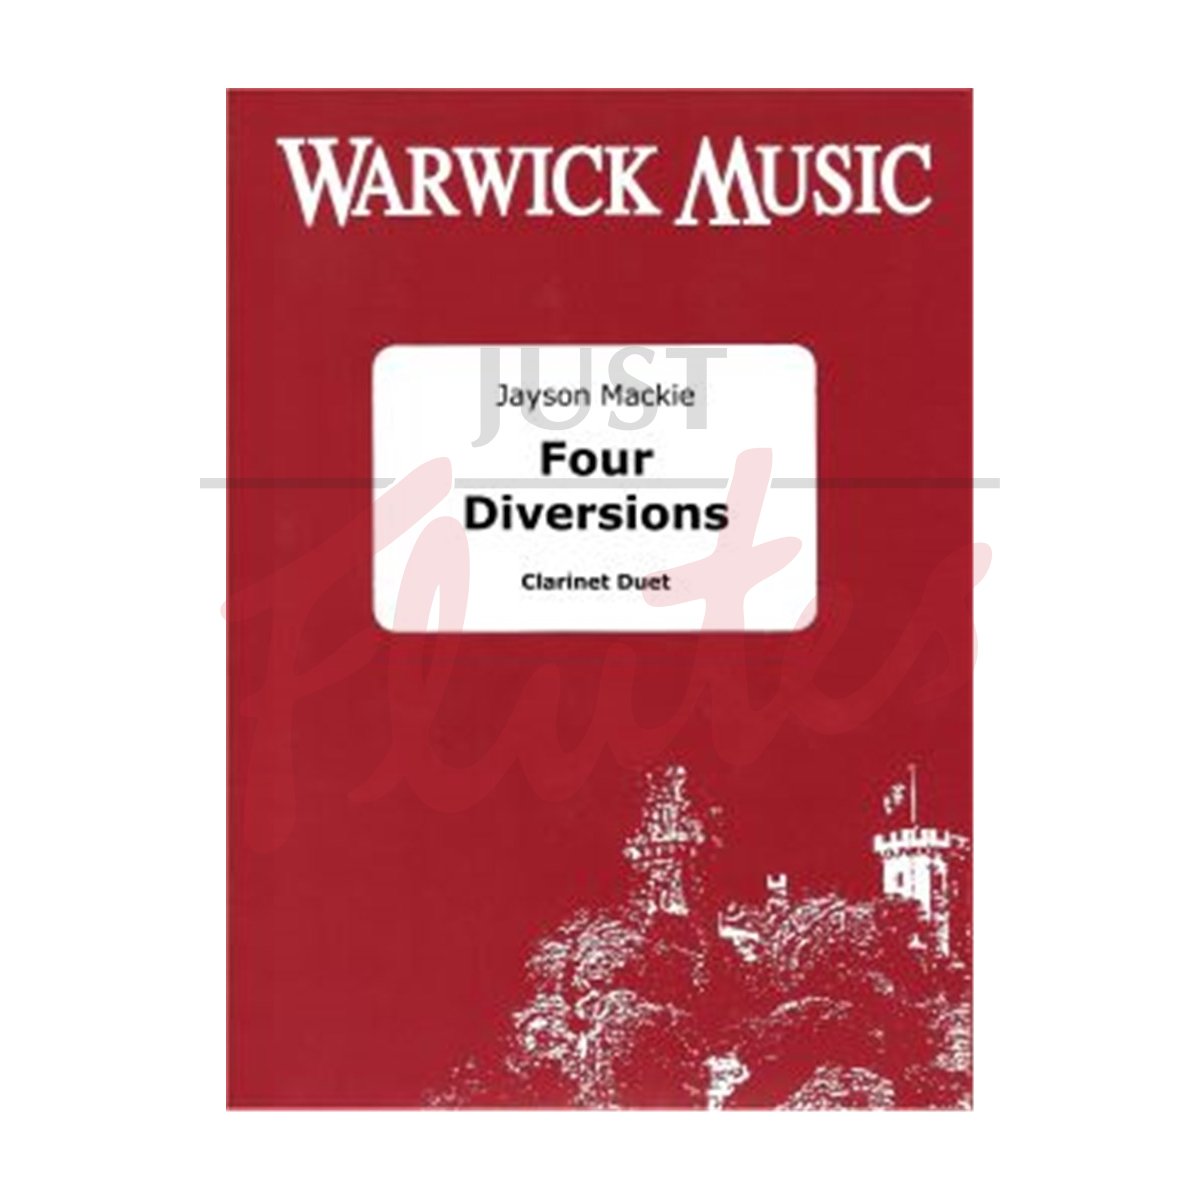 Four Diversions for Clarinet Duet